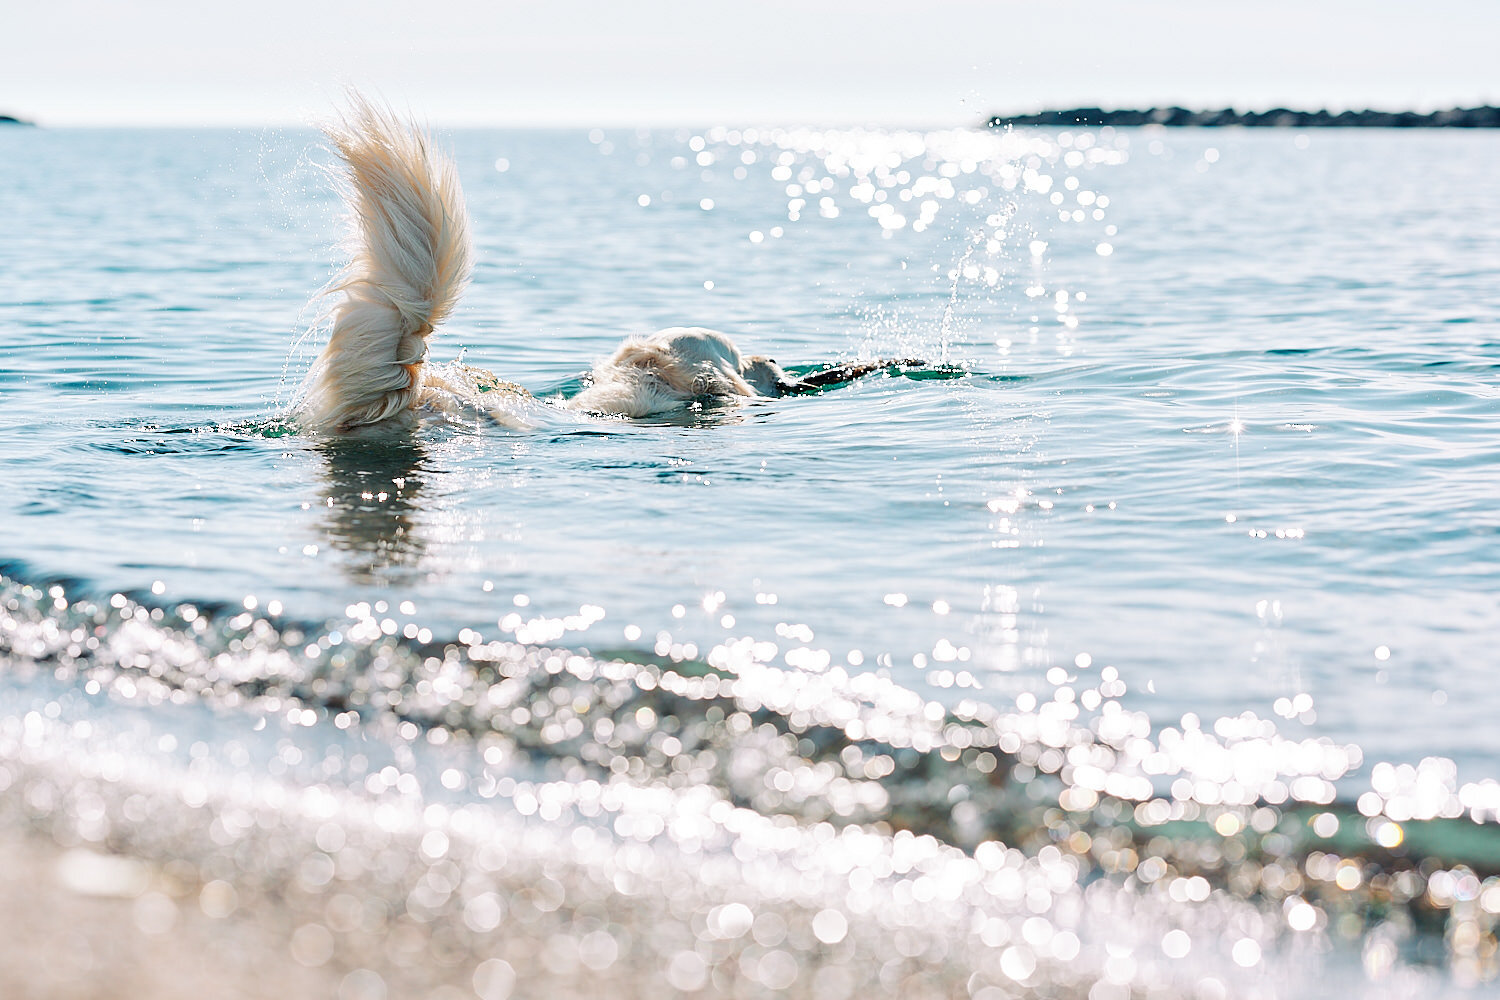  Joyka the Golden Retriever is enjoying the beach time at Presque Isle State park on Lake Erie in Western Pennsylvania on a warm summer afternoon. His fur is wet and the water is shining  in the sun. 